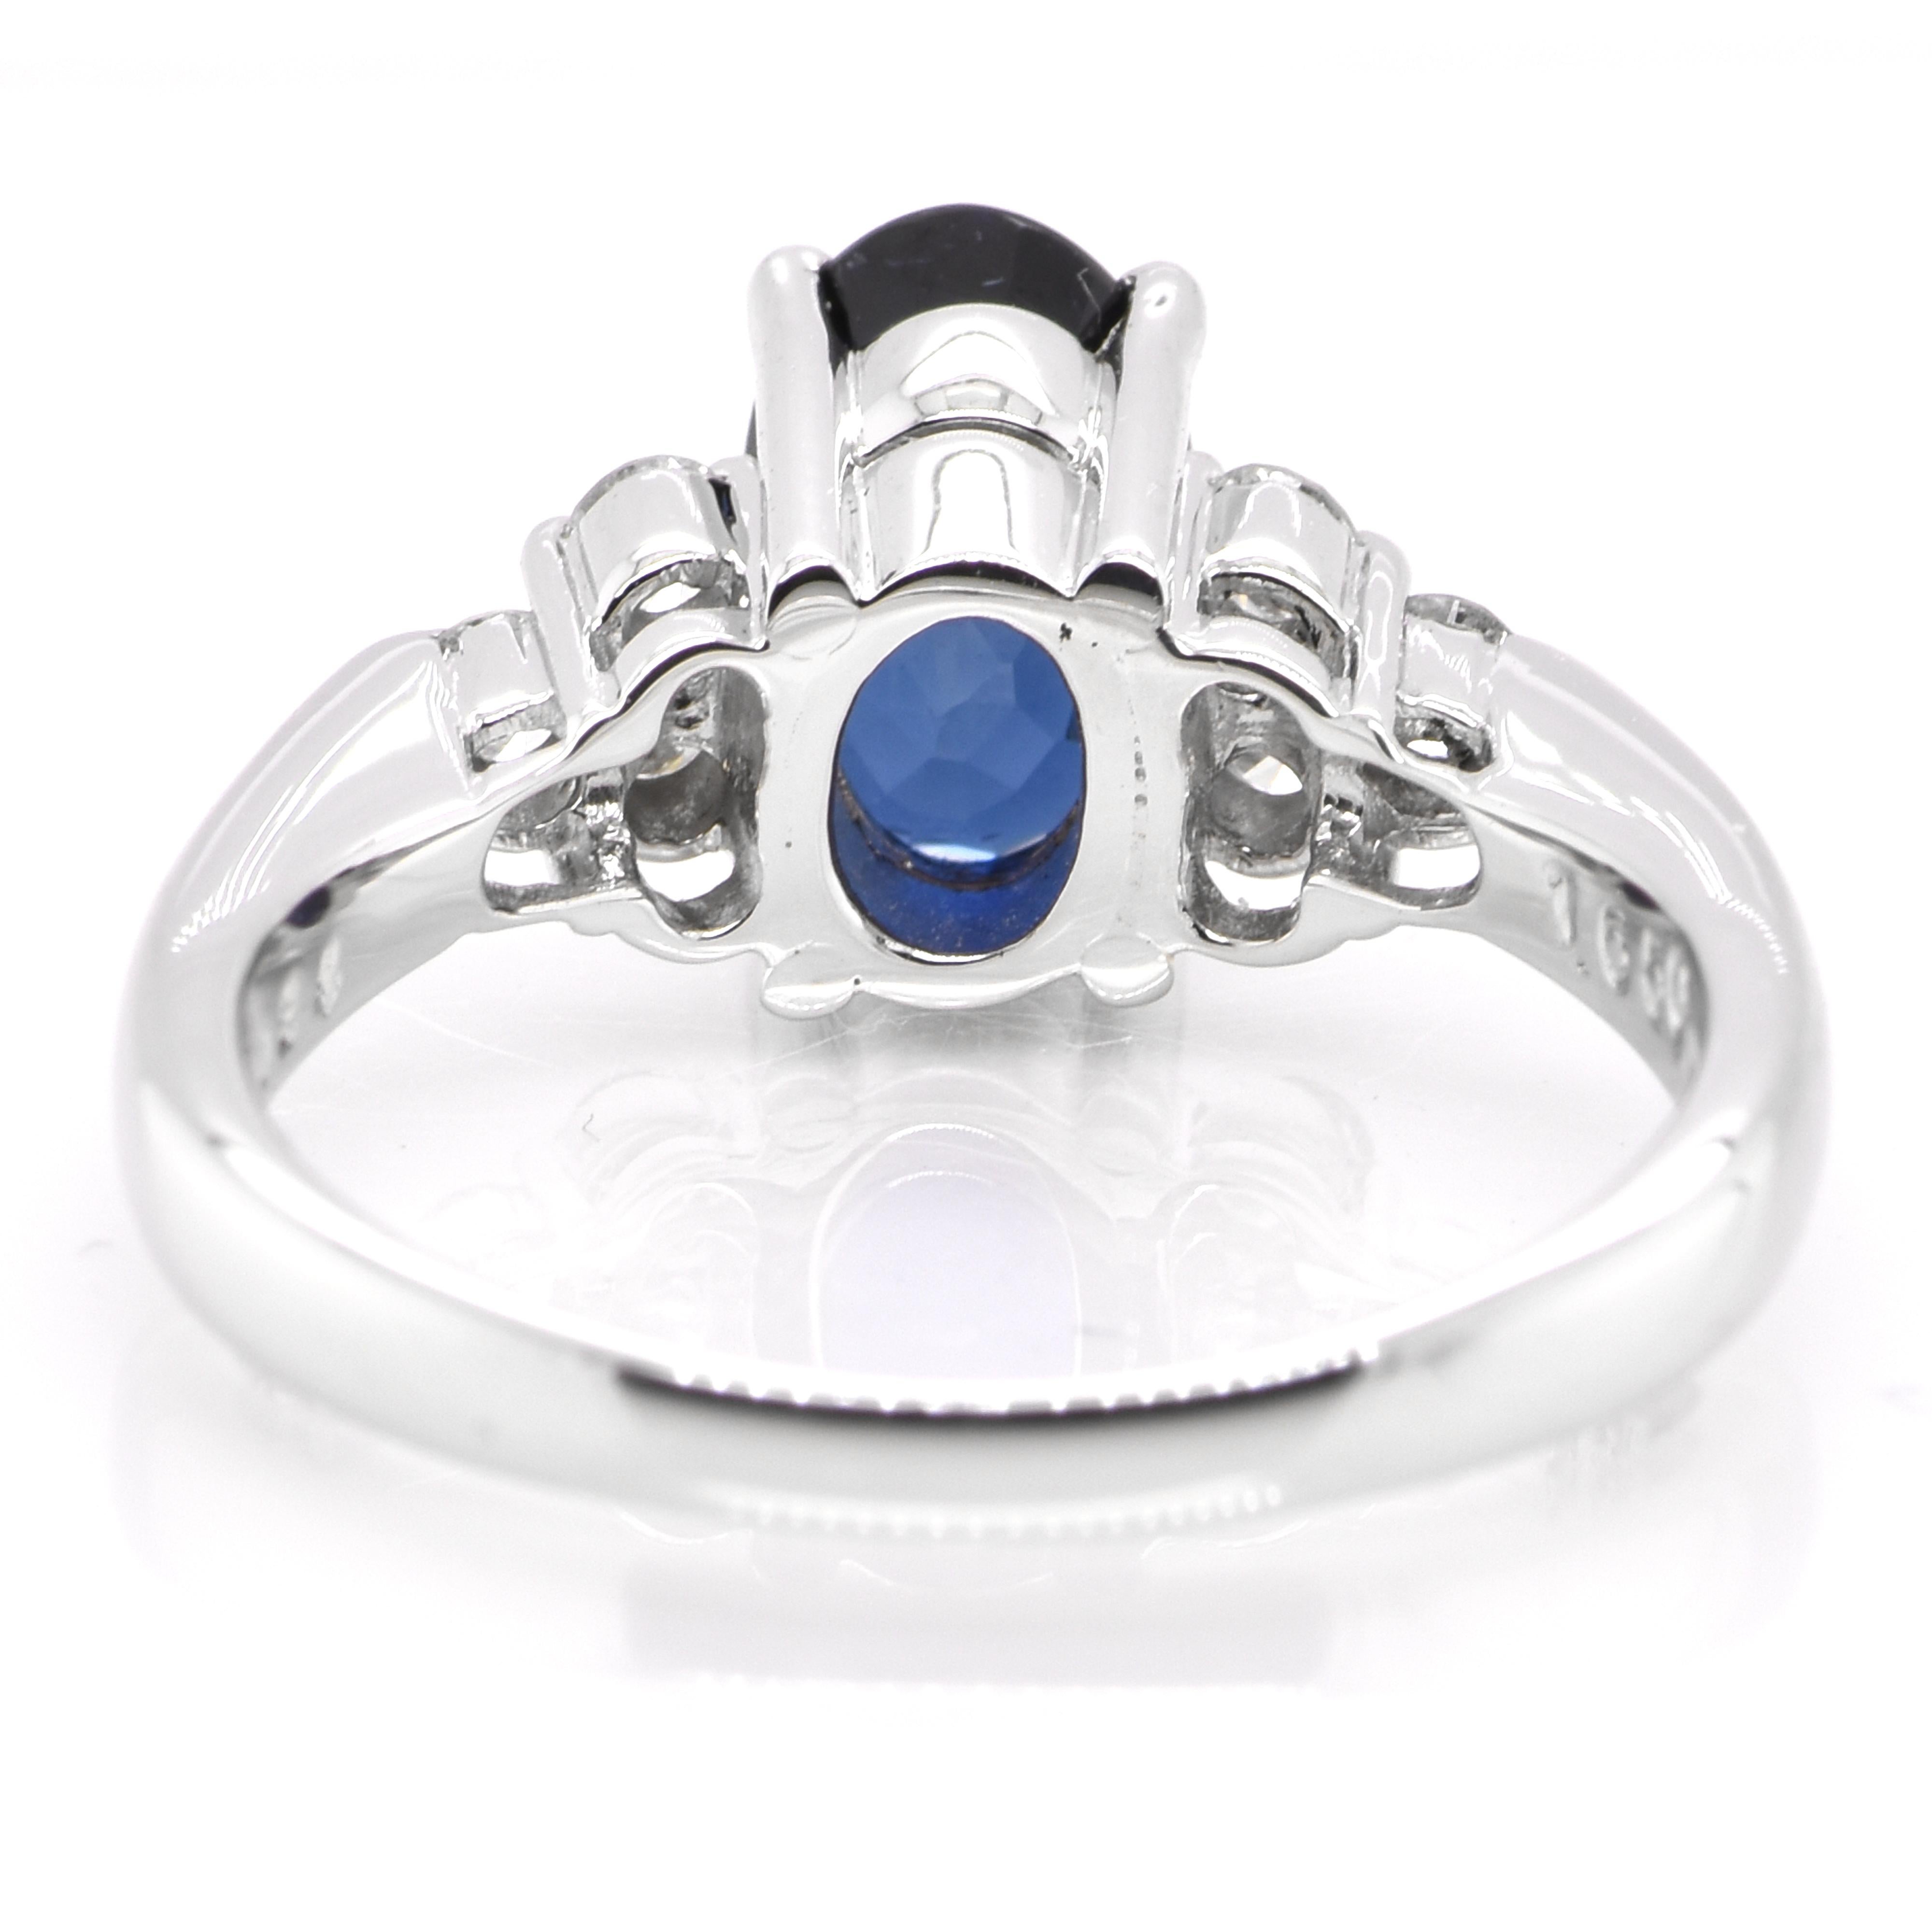 Women's 1.65 Carat Natural Blue Sapphire and Diamond Ring set in Platinum For Sale